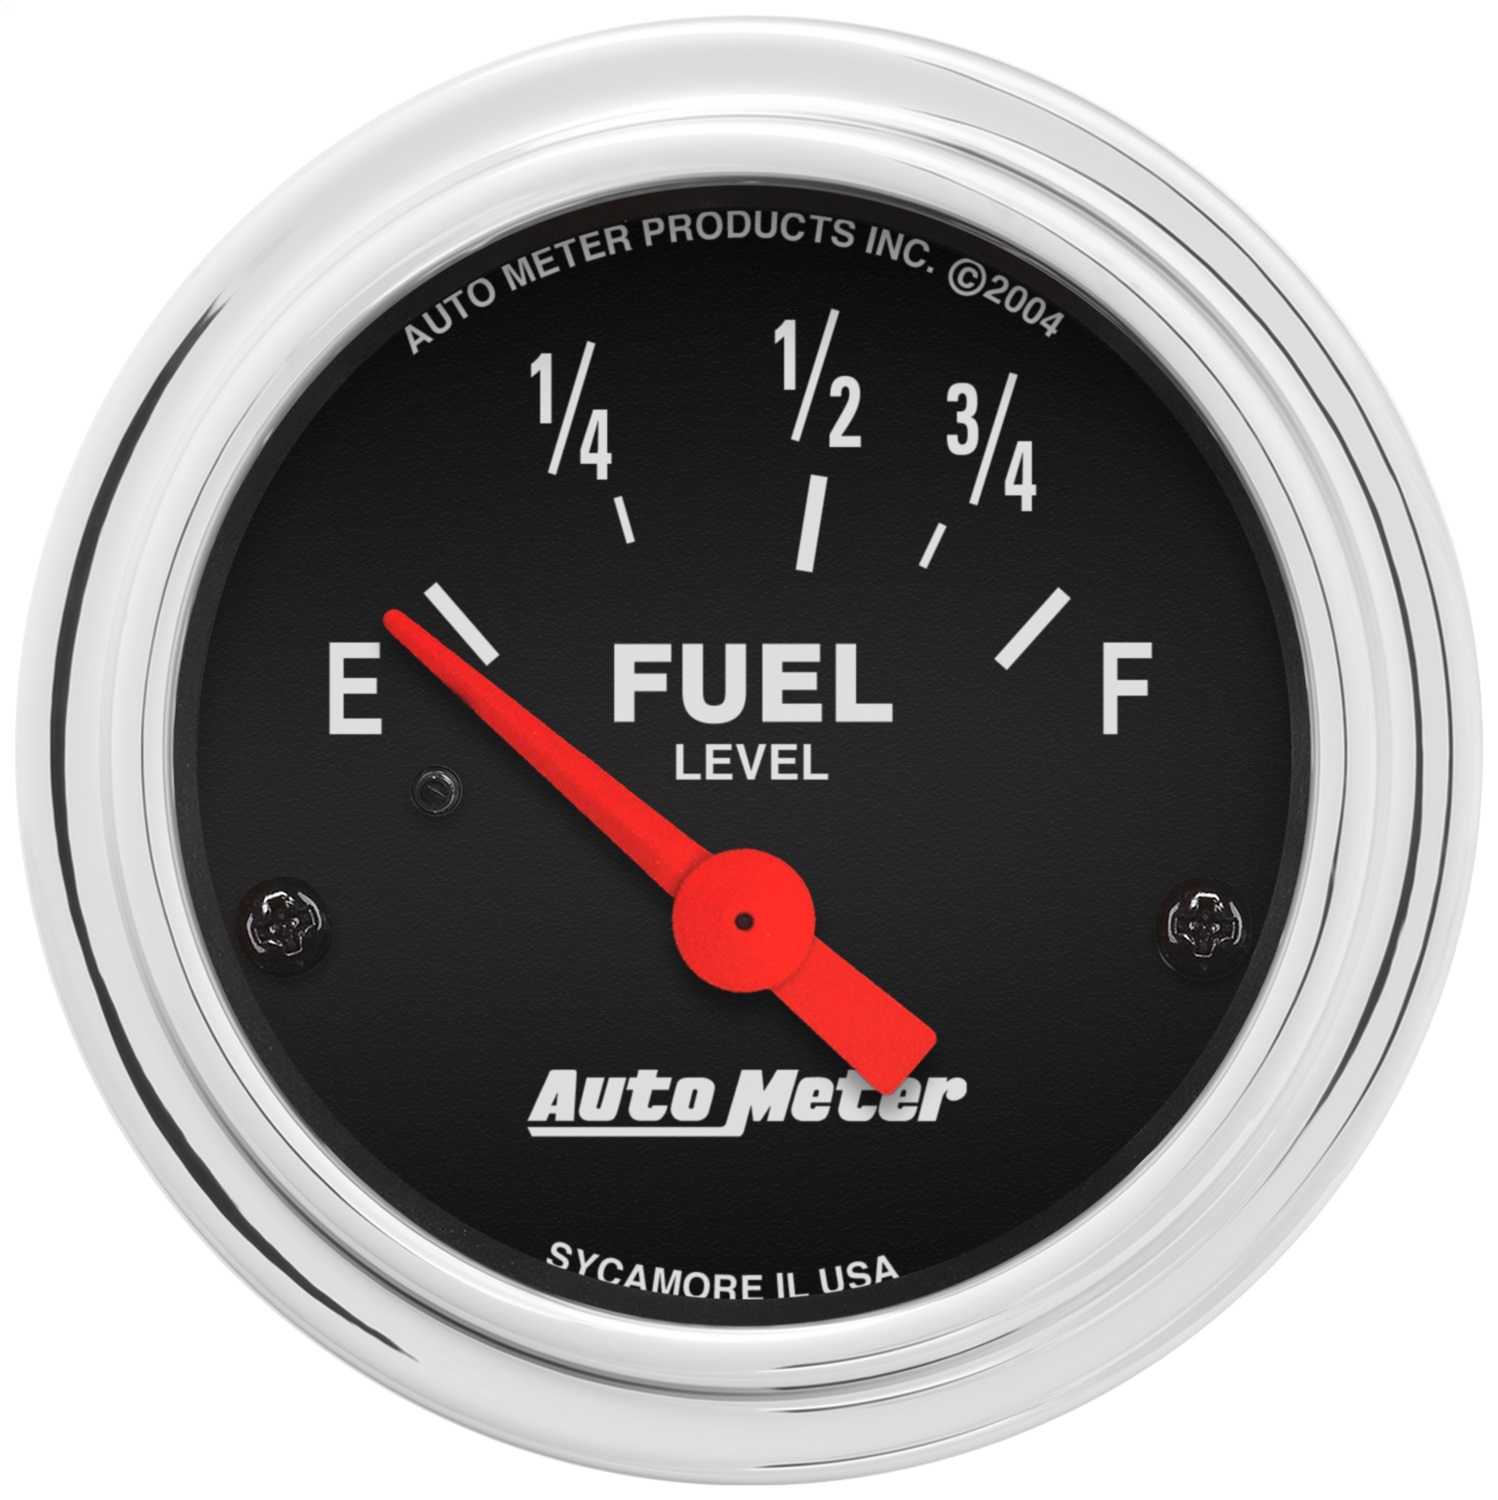 Auto Meter Auto Meter 2515 Traditional Chrome Electric Fuel Level Gauge